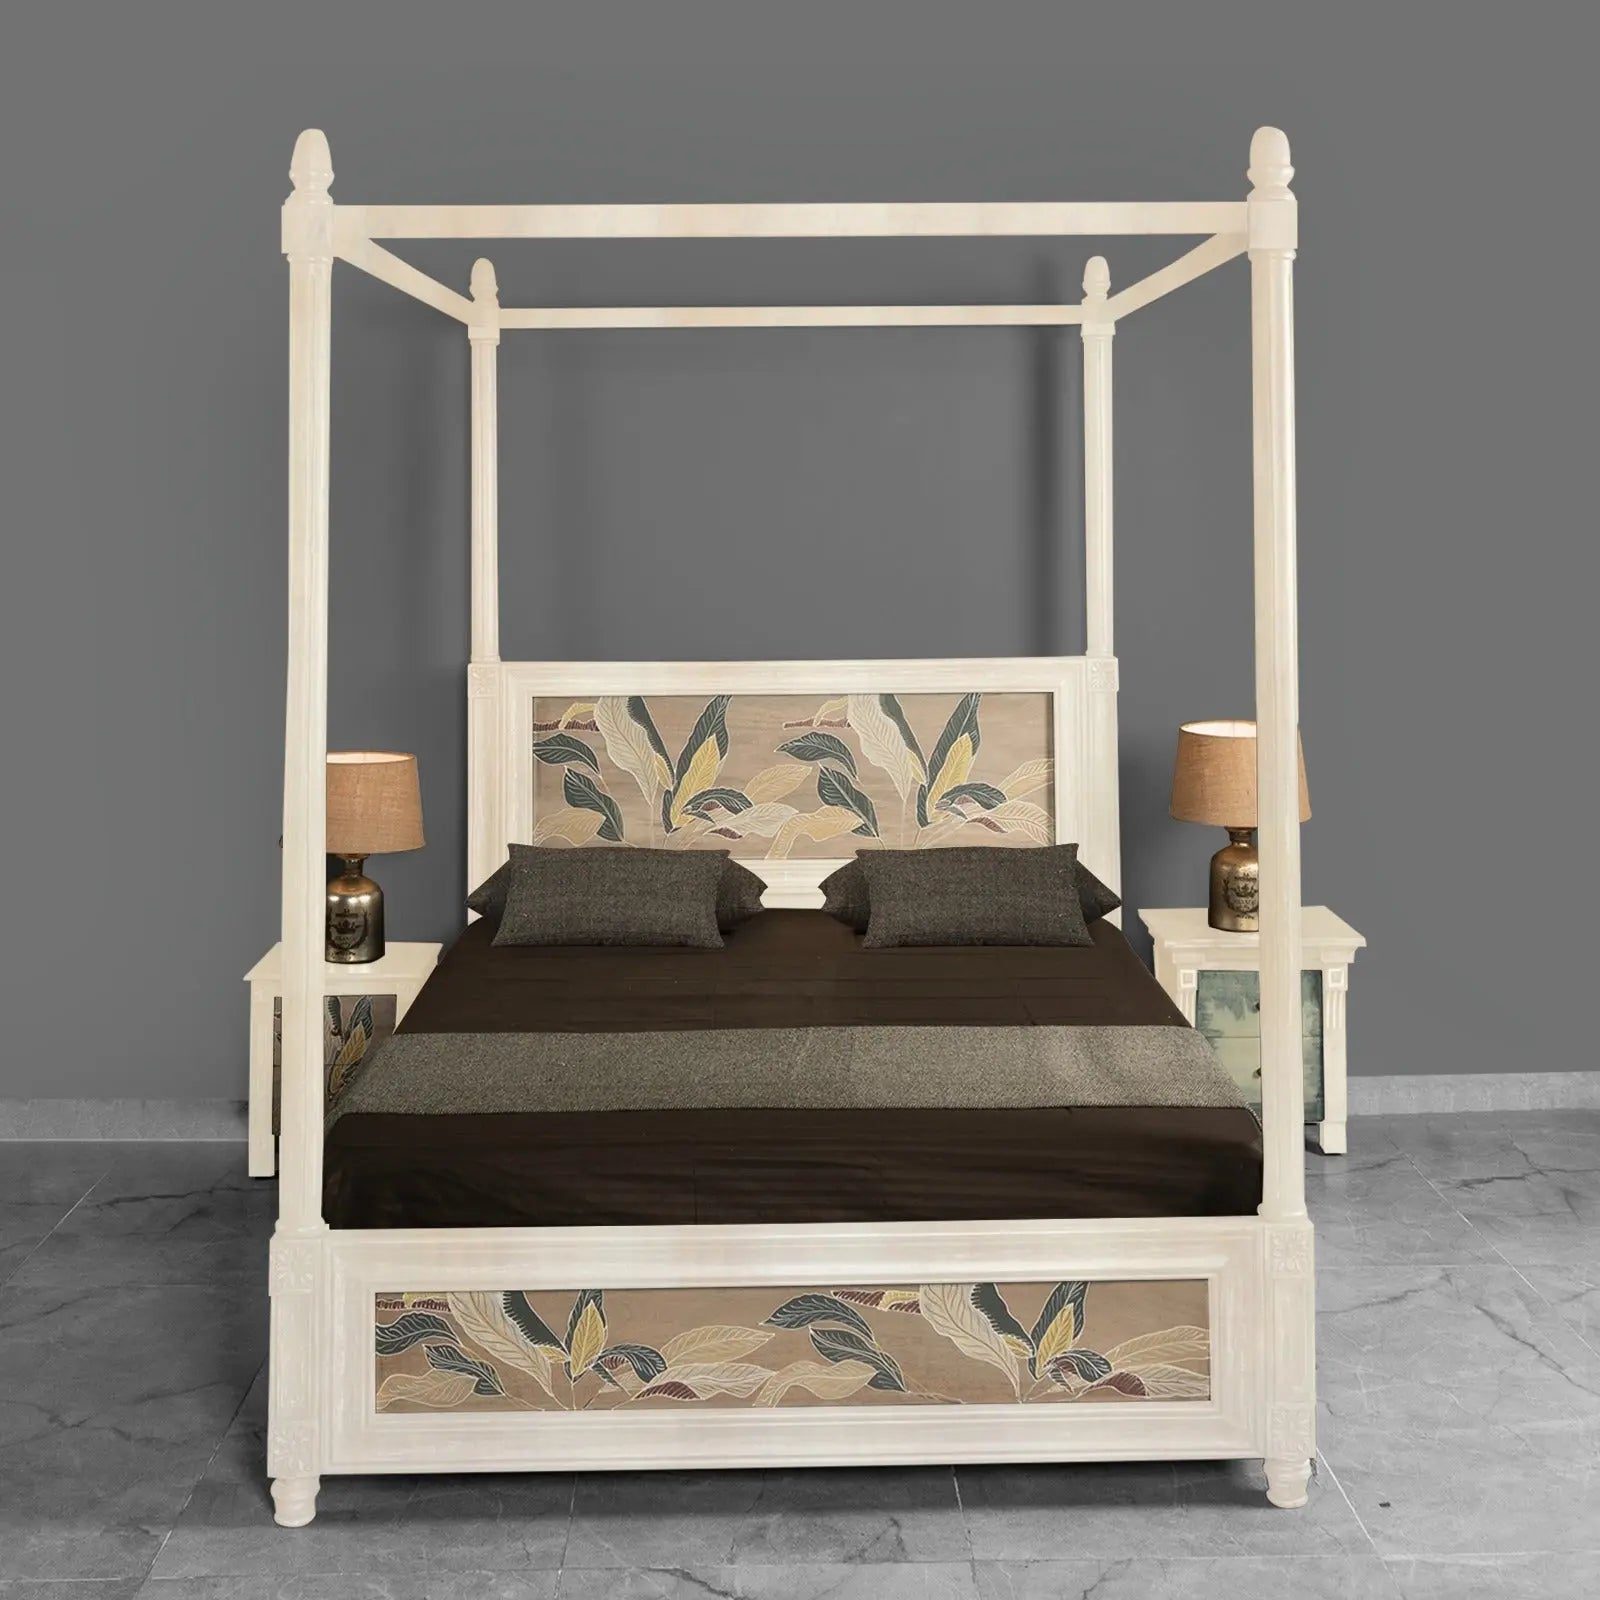  Solid Wood Bed online